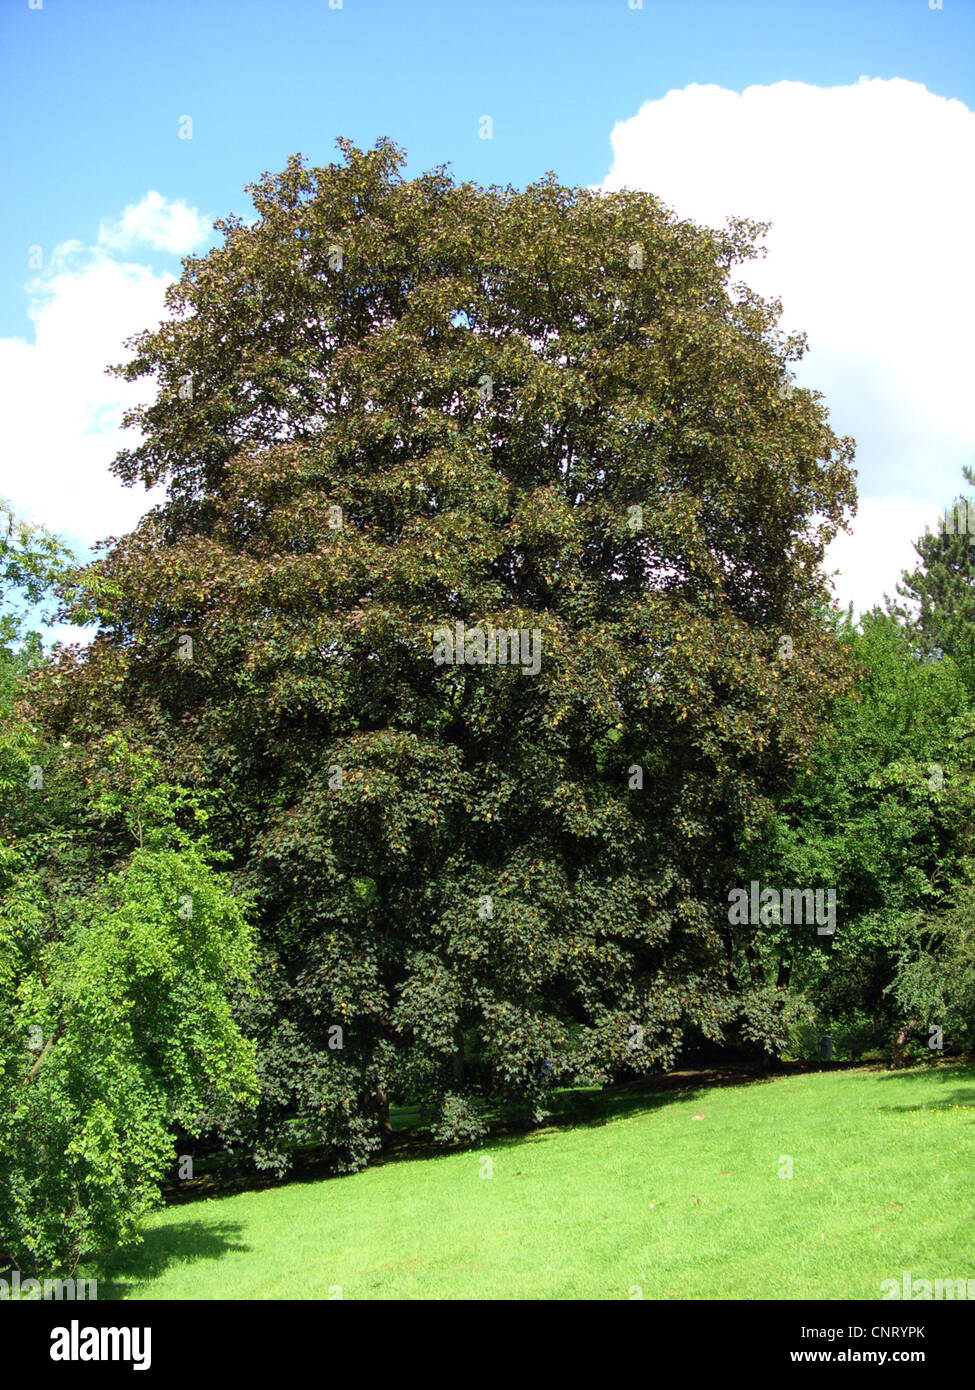 sycamore maple, great maple (Acer pseudoplatanus 'Atropurpureum', Acer pseudoplatanus Atropurpureum), in a park, Germany Stock Photo